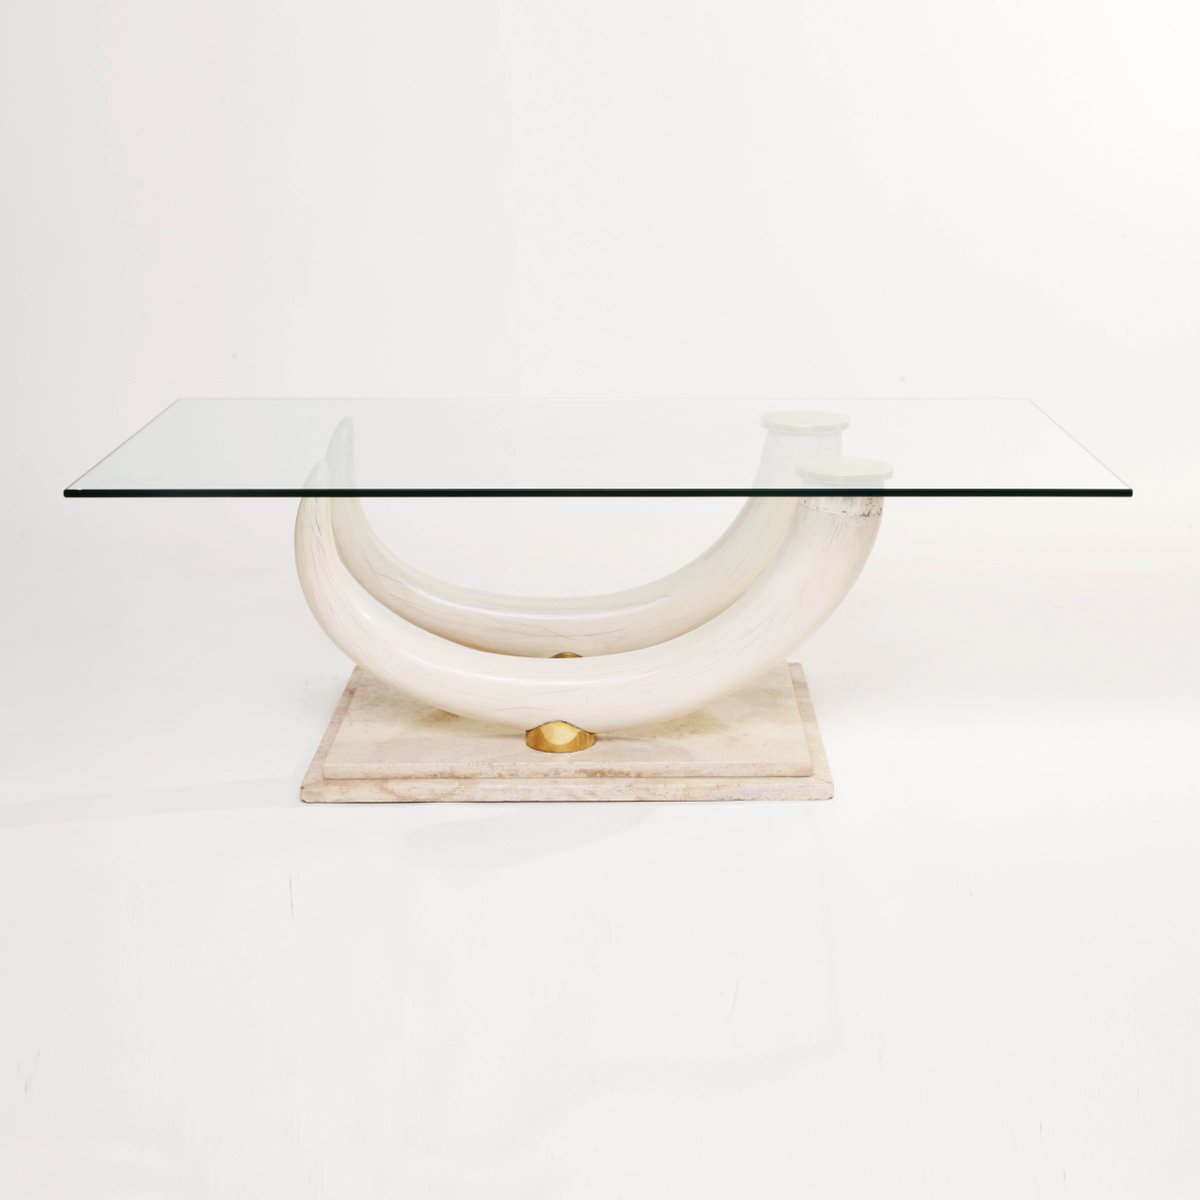 Faux Elephant Tusk Coffee Table By Maison Jansen For Ralph Pucci